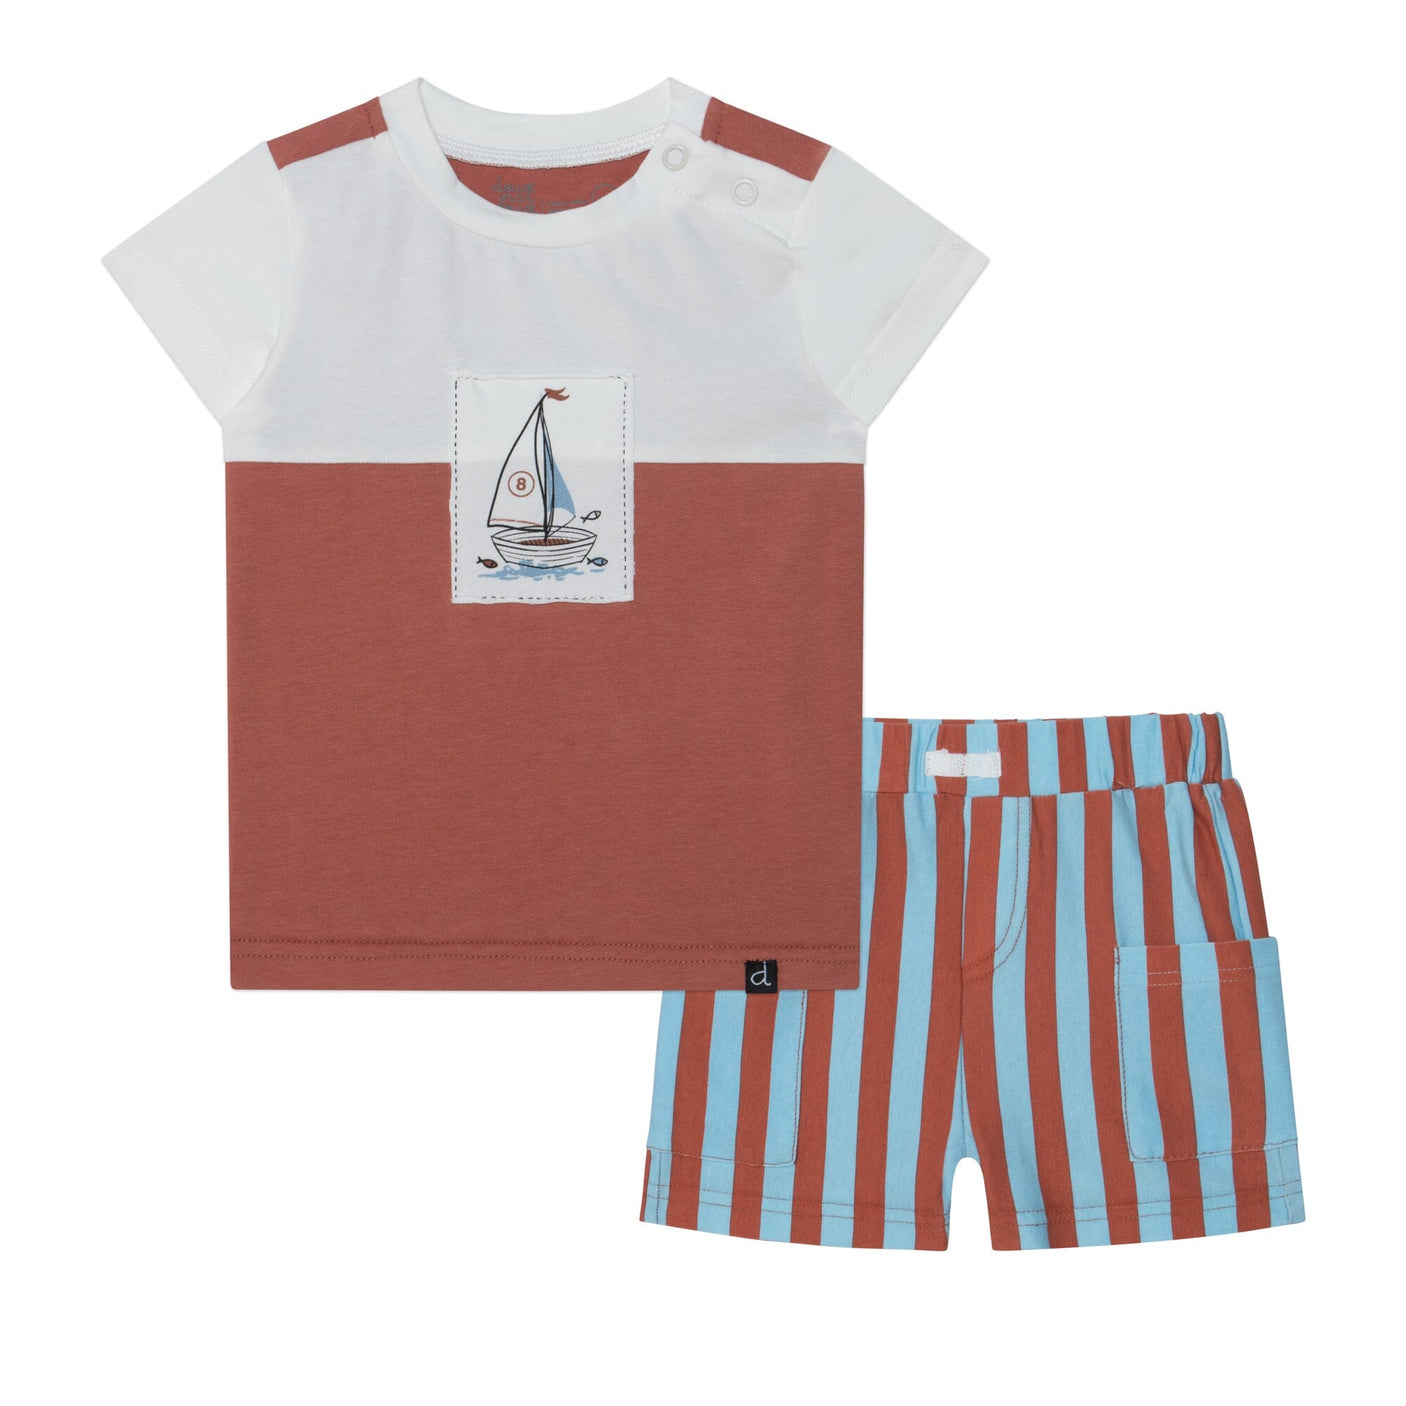 Organic Cotton Colorblocked Top & Short Set White & Brown With Stripe-0